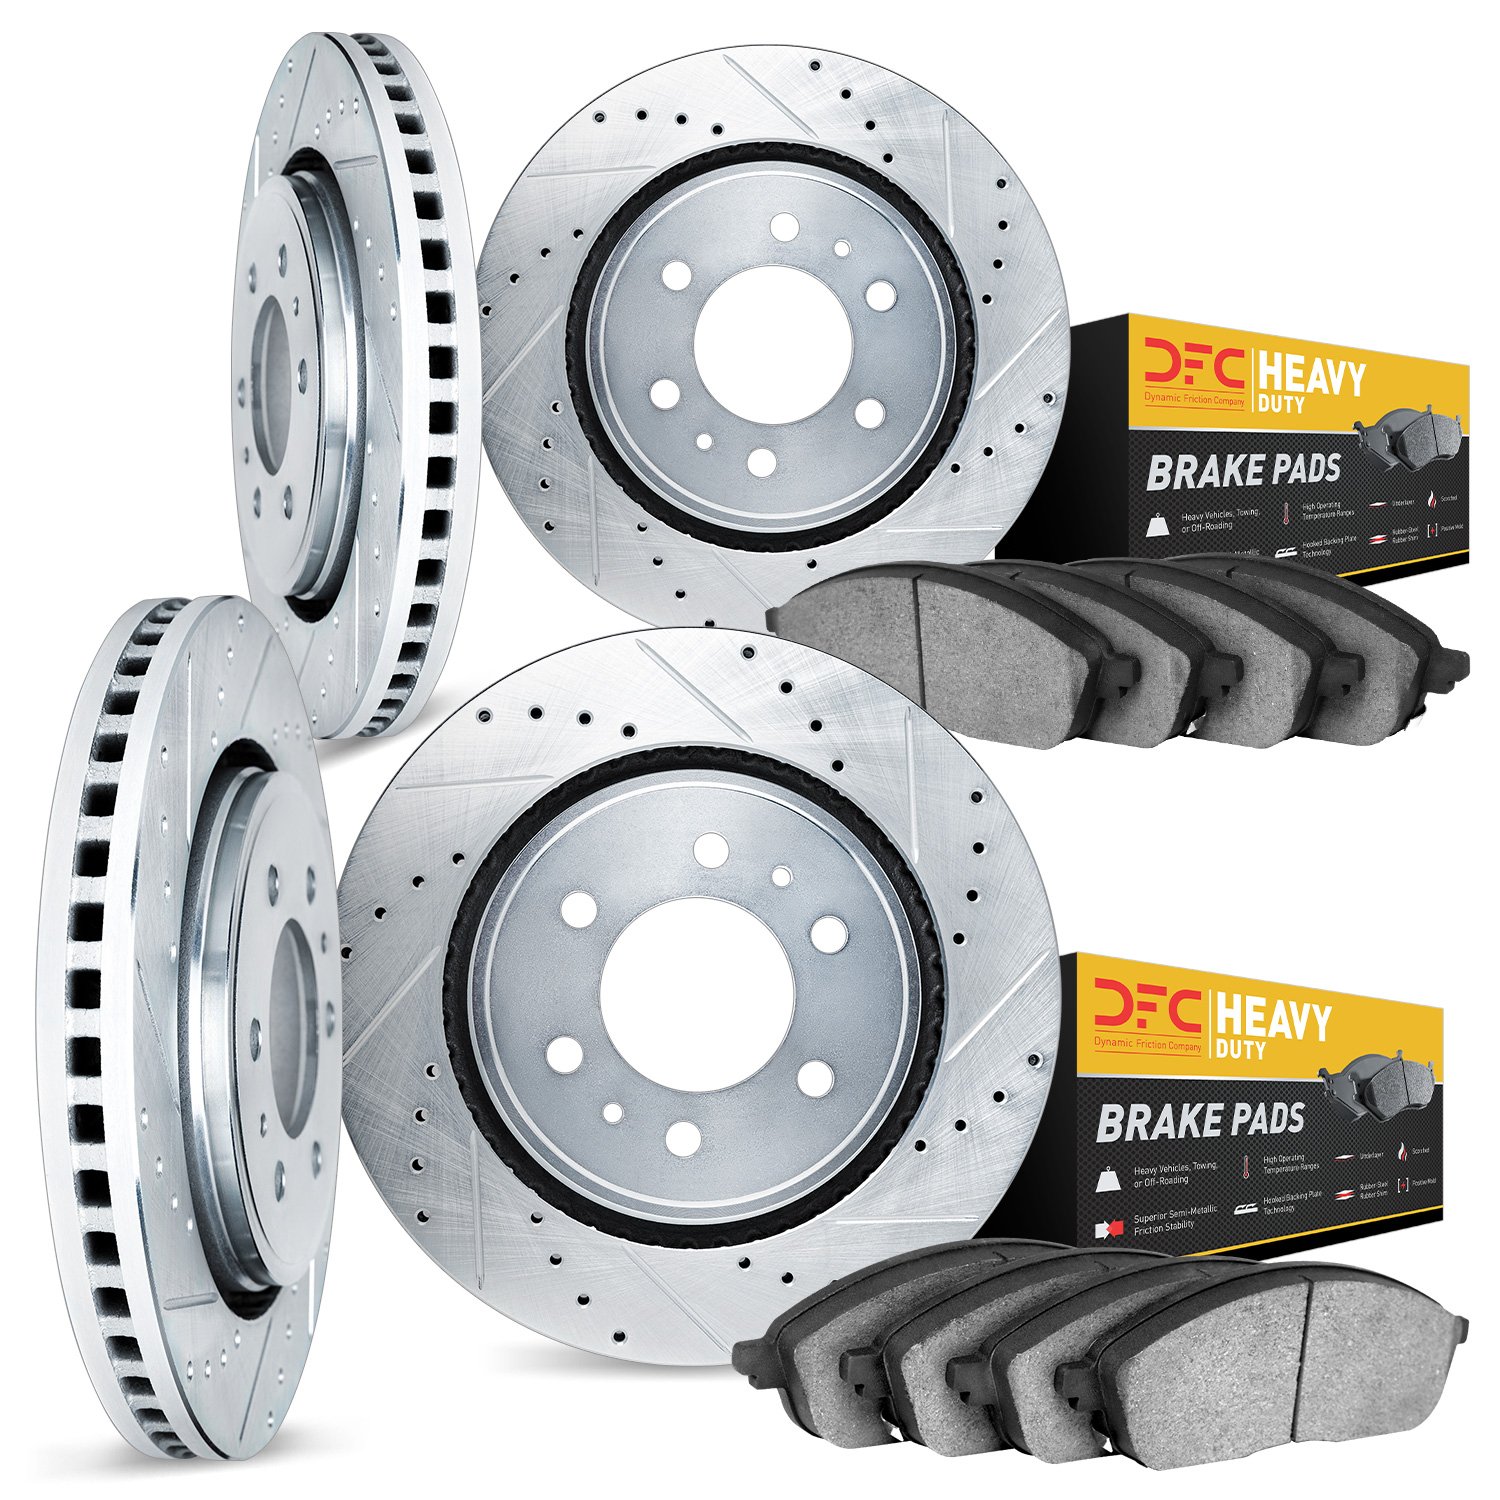 7204-48073 Drilled/Slotted Rotors w/Heavy-Duty Brake Pads Kit [Silver], 2009-2014 GM, Position: Front and Rear